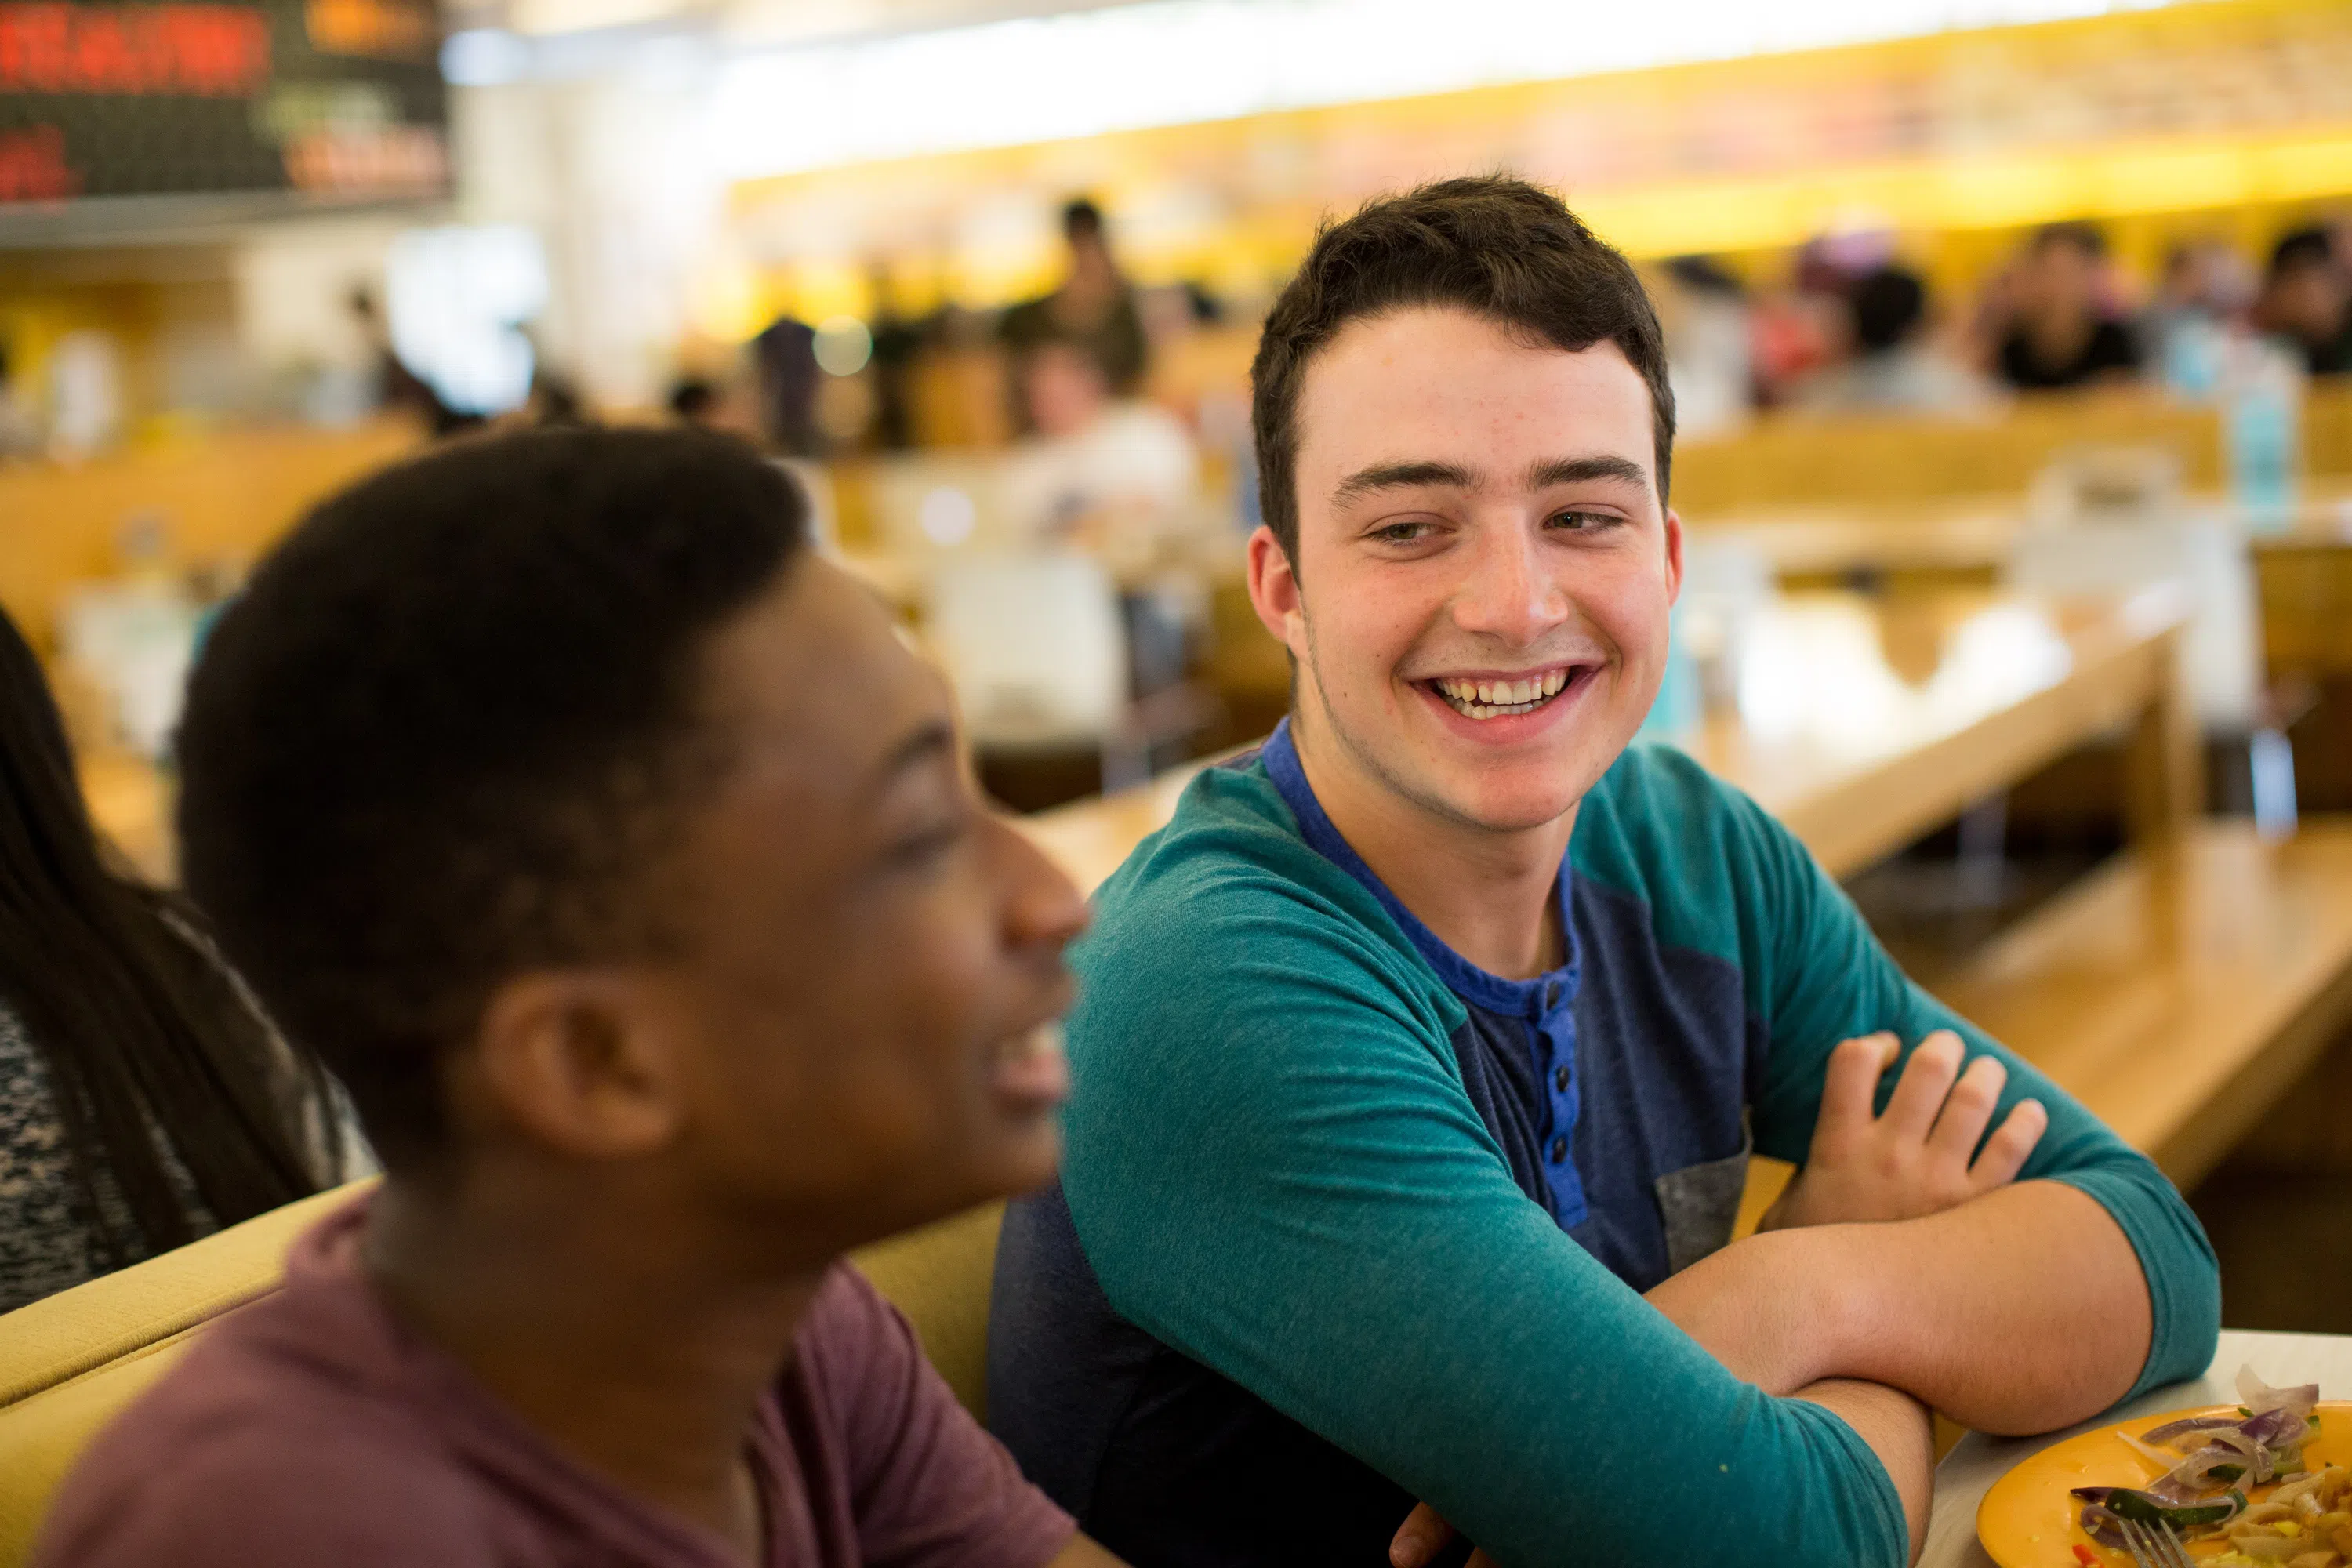 Two students talk and laugh at the dining hall